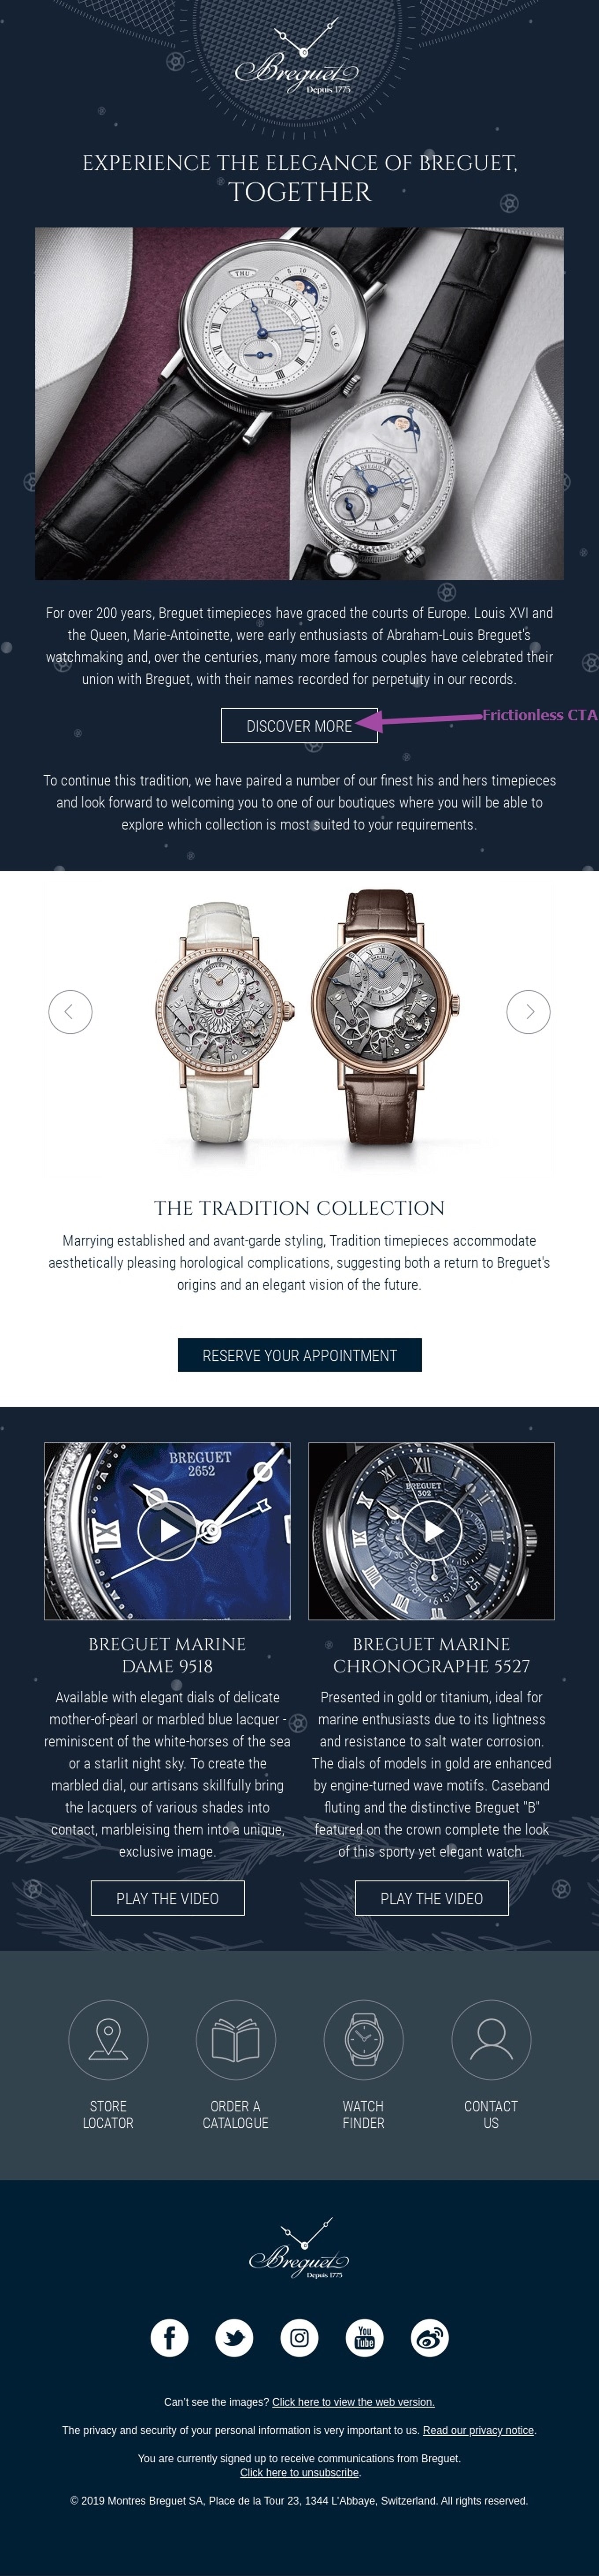 Example of an actionable, frictionless CTA from Breguet